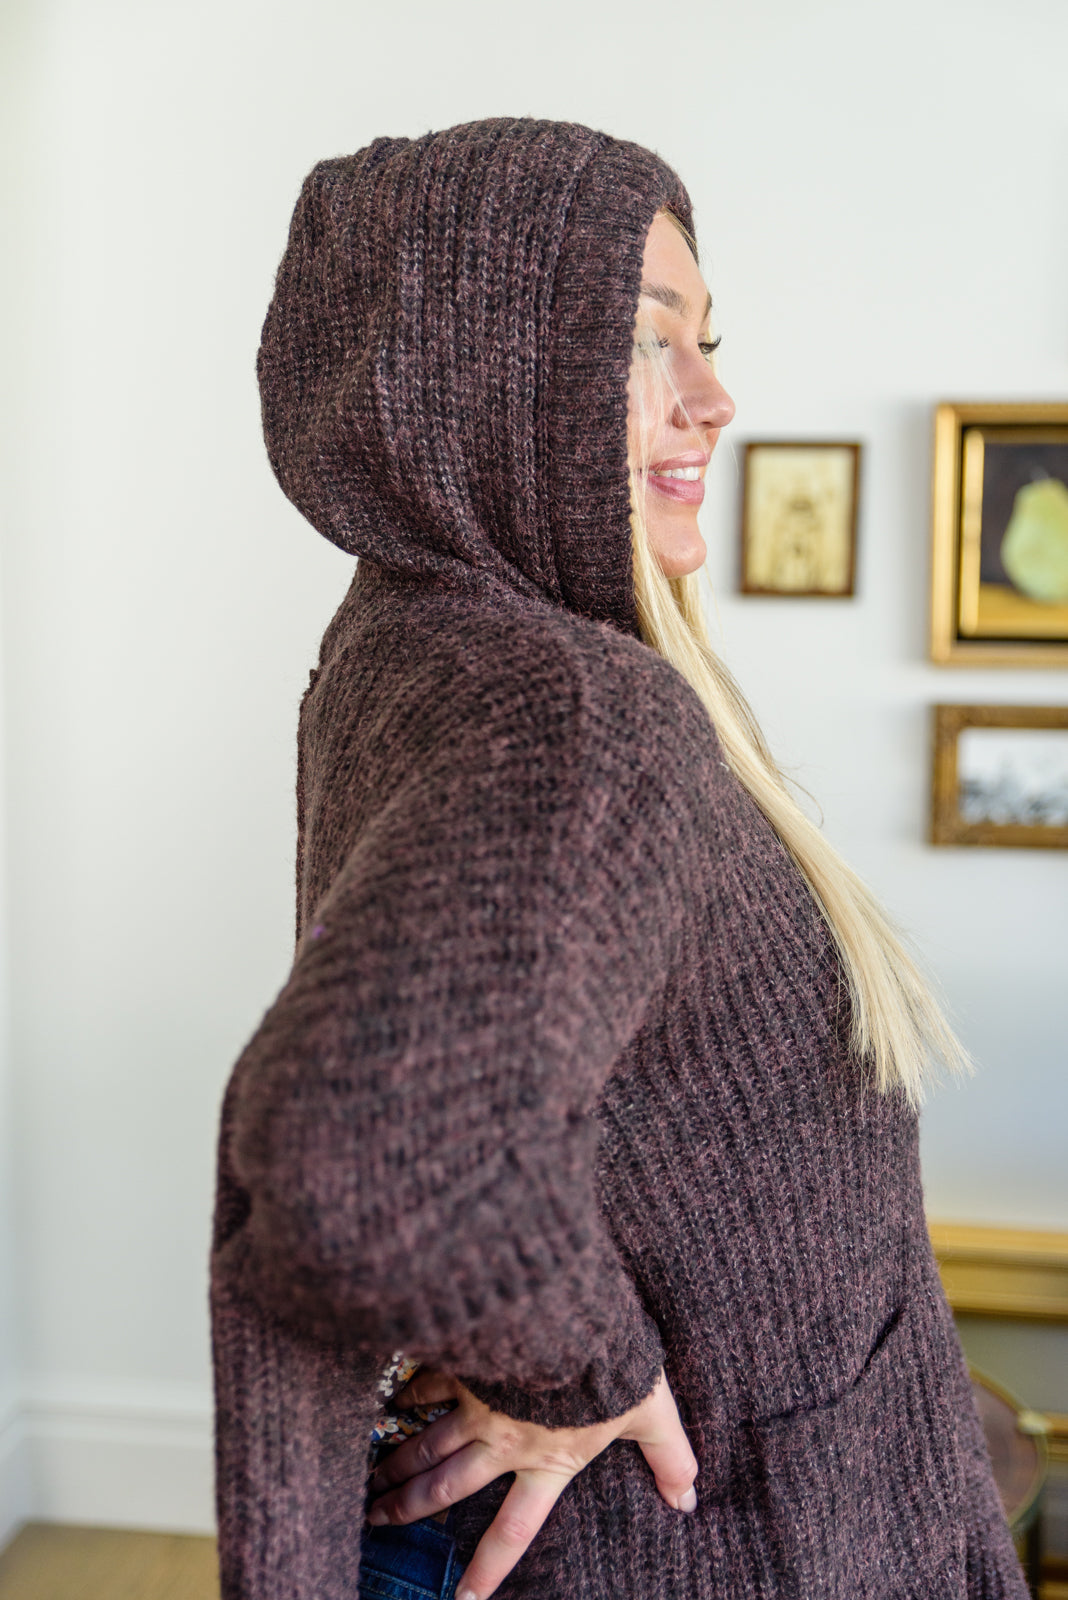 Views of Aspen Hooded Pull Over Sweater